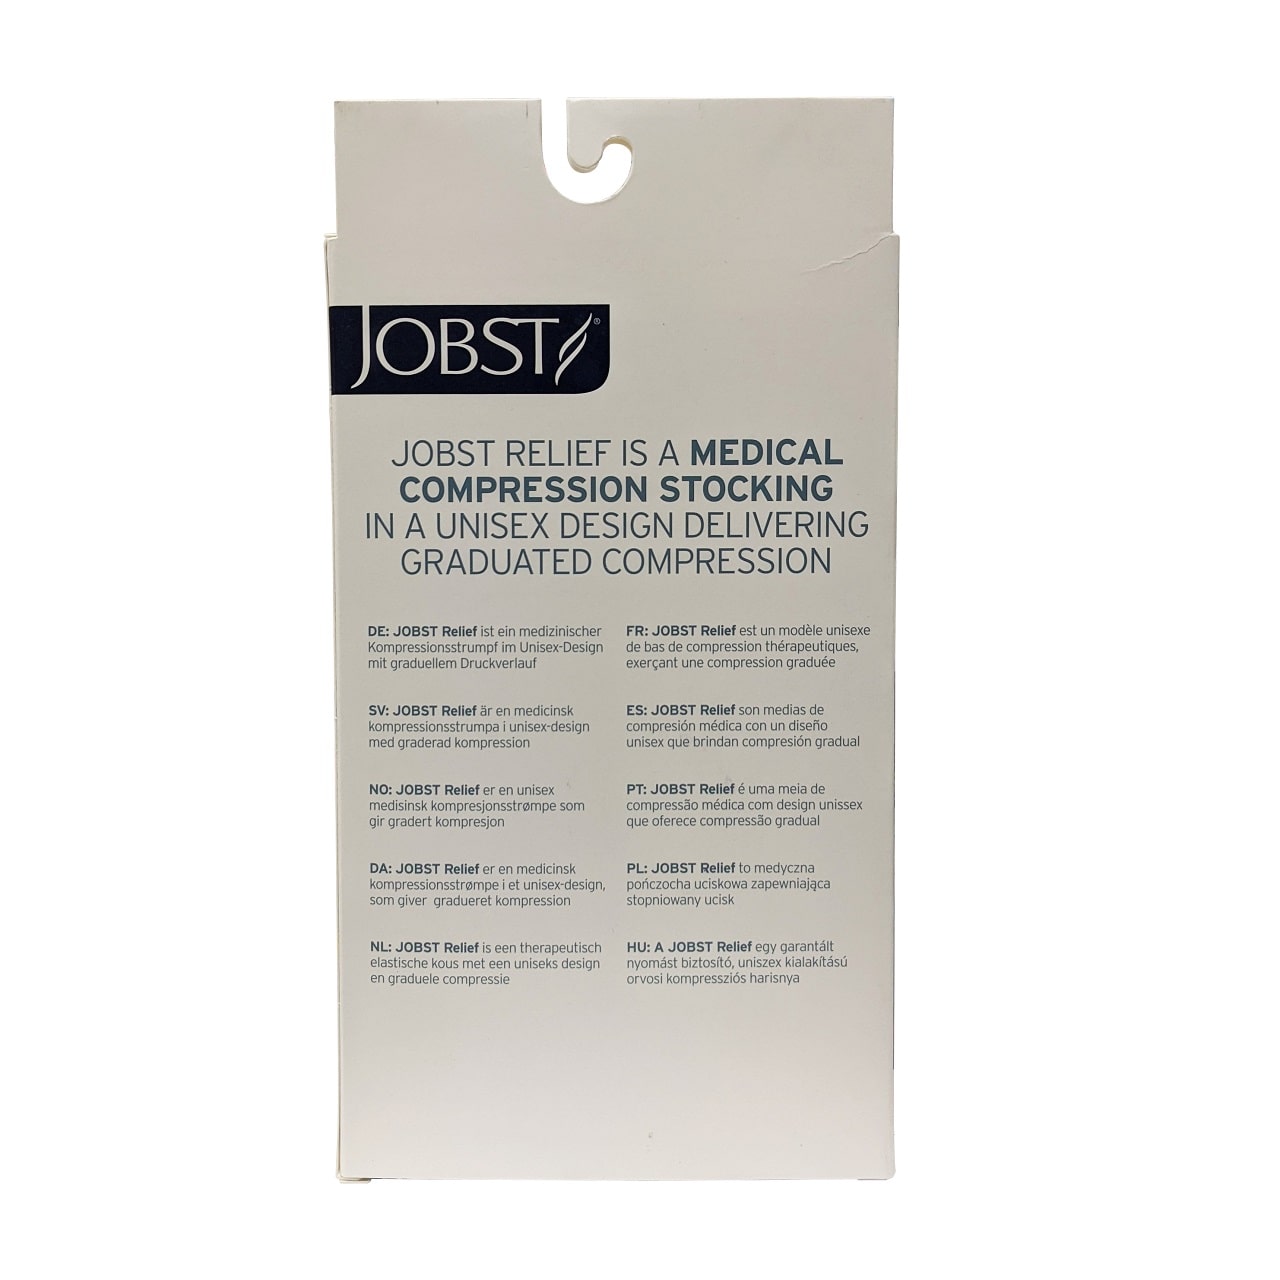 Description for Jobst Relief Compression Stockings 15-20 mmHg - Knee High / Open Toe / Beige (Large)